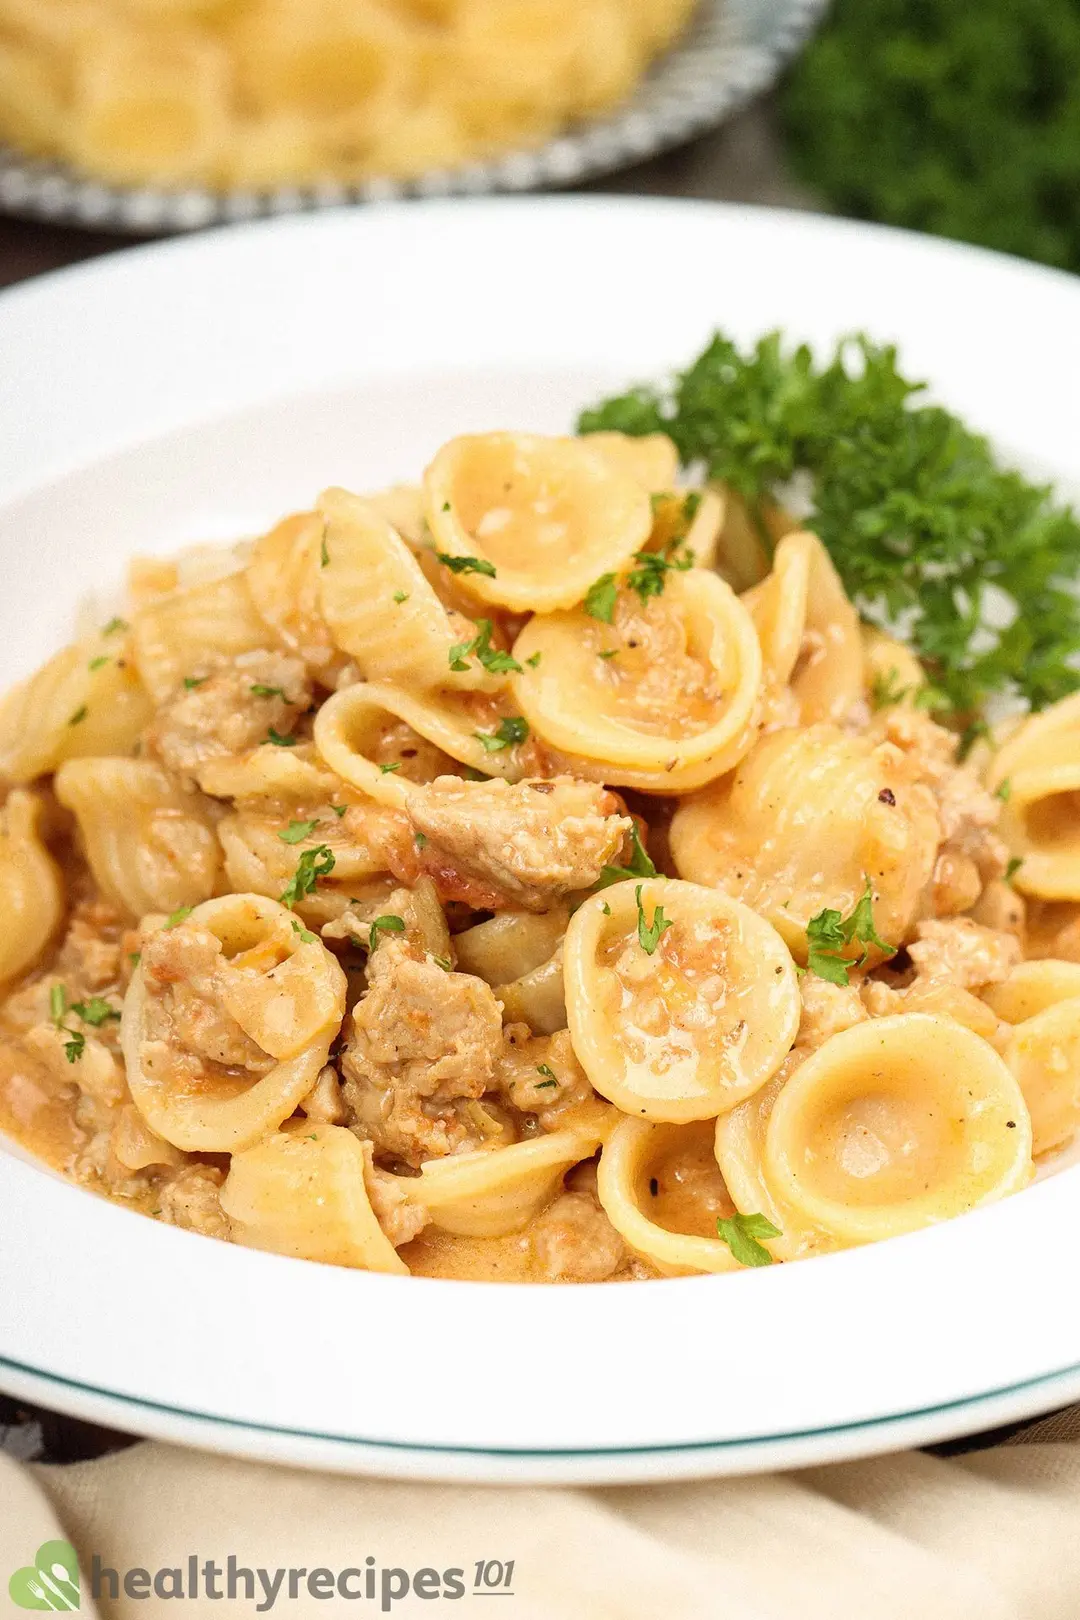 A close-up shot of a plate of ground chicken pasta